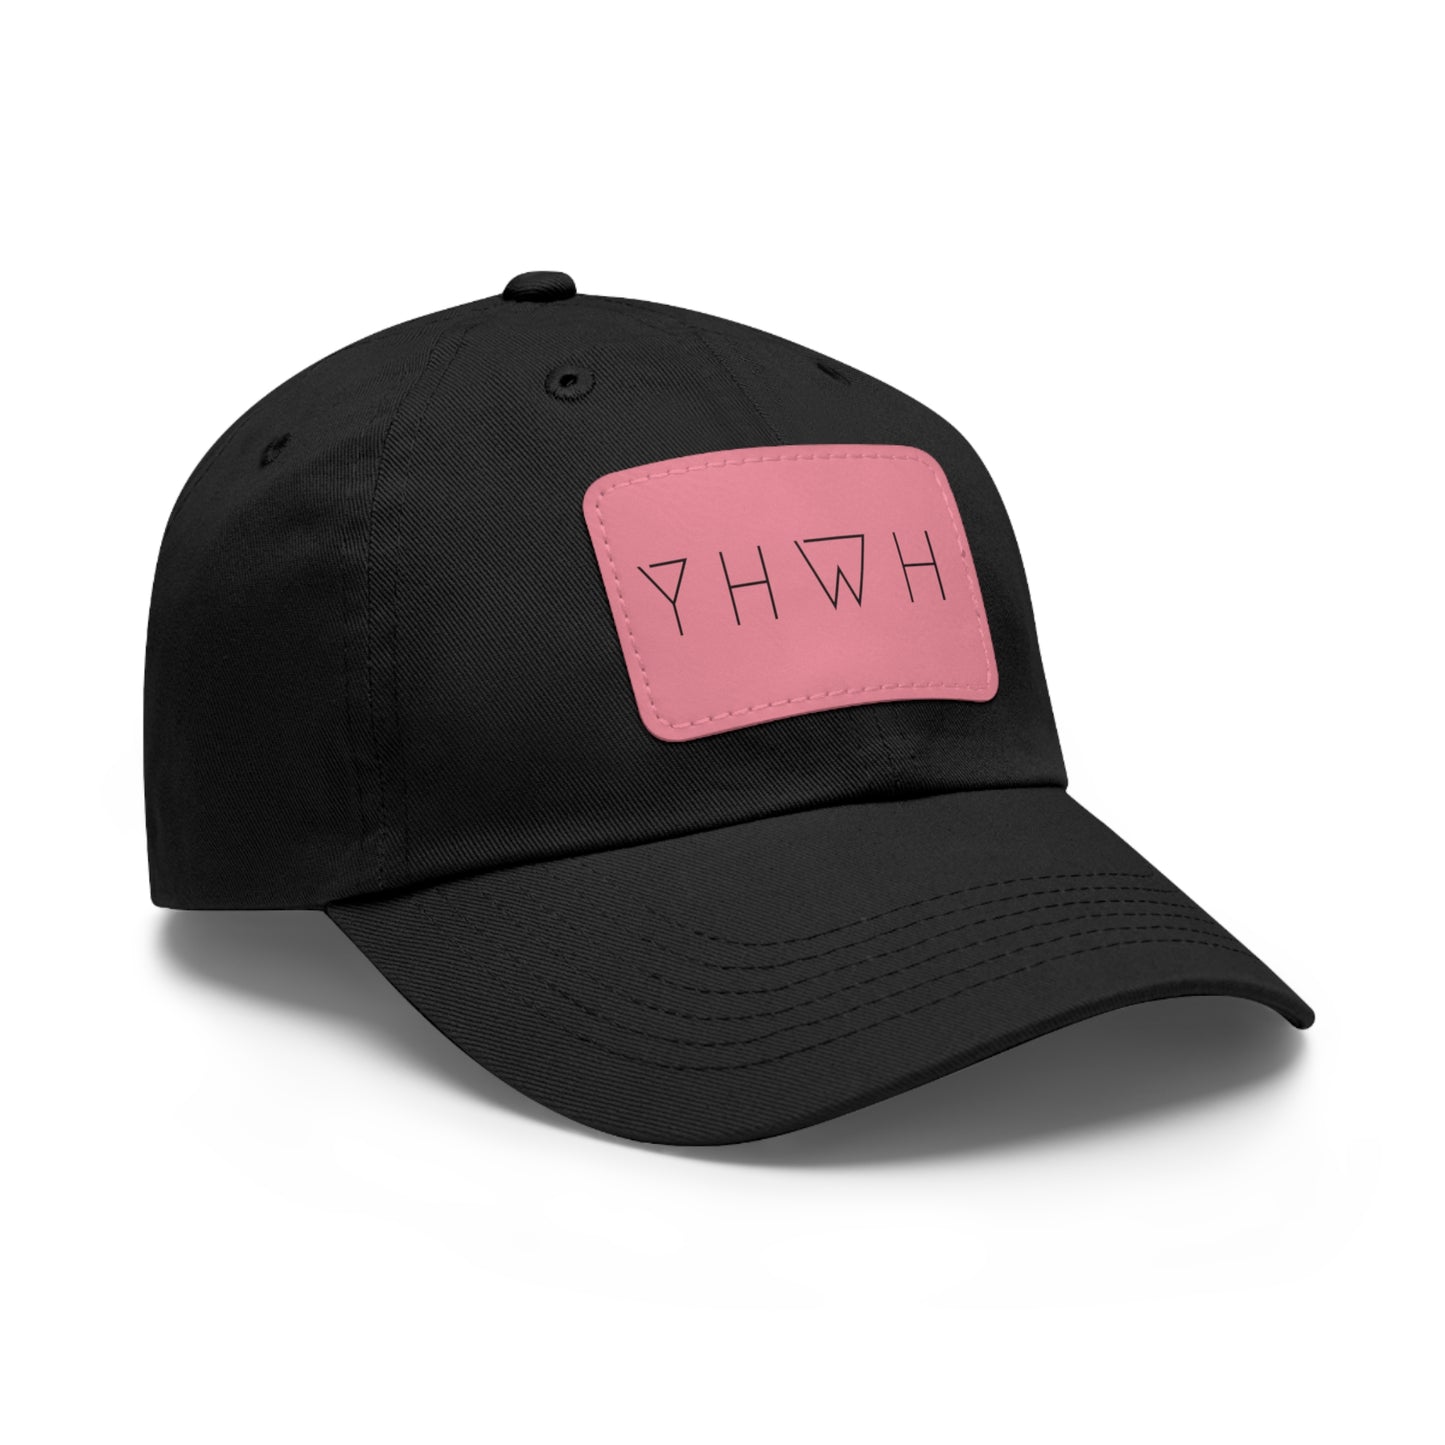 YHWH Dad Hat with Leather Patch